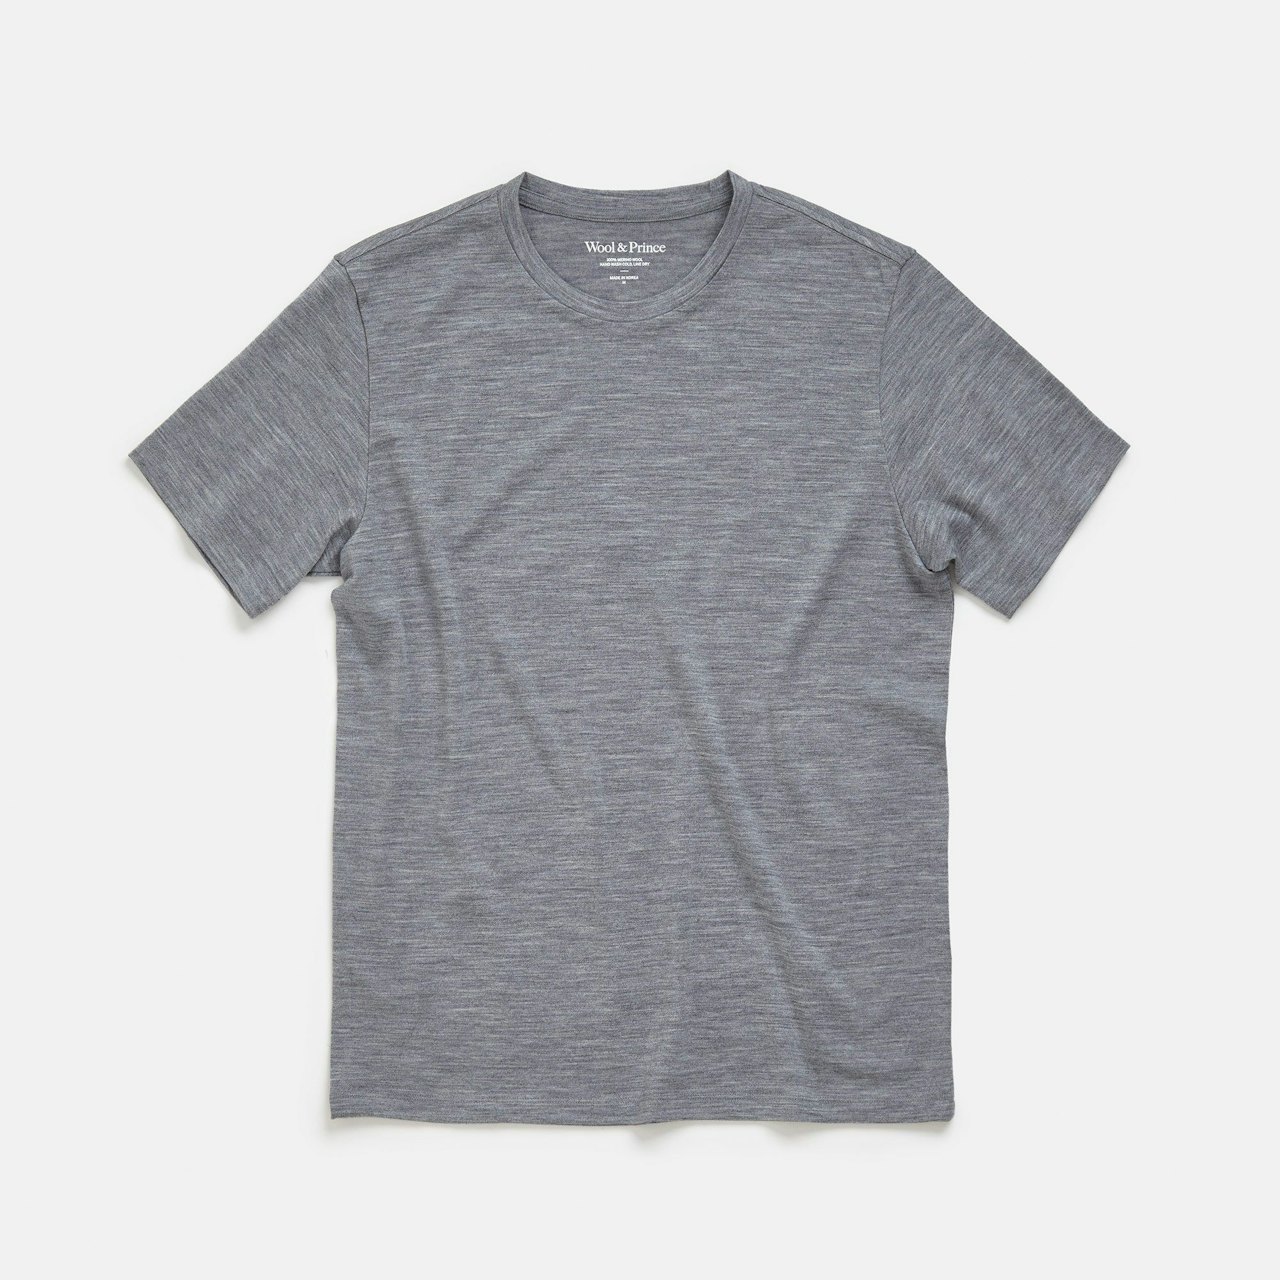 Crew Neck Tee Merino Wool Heather Gray Wool & Prince Portland for Conscious by Chloé